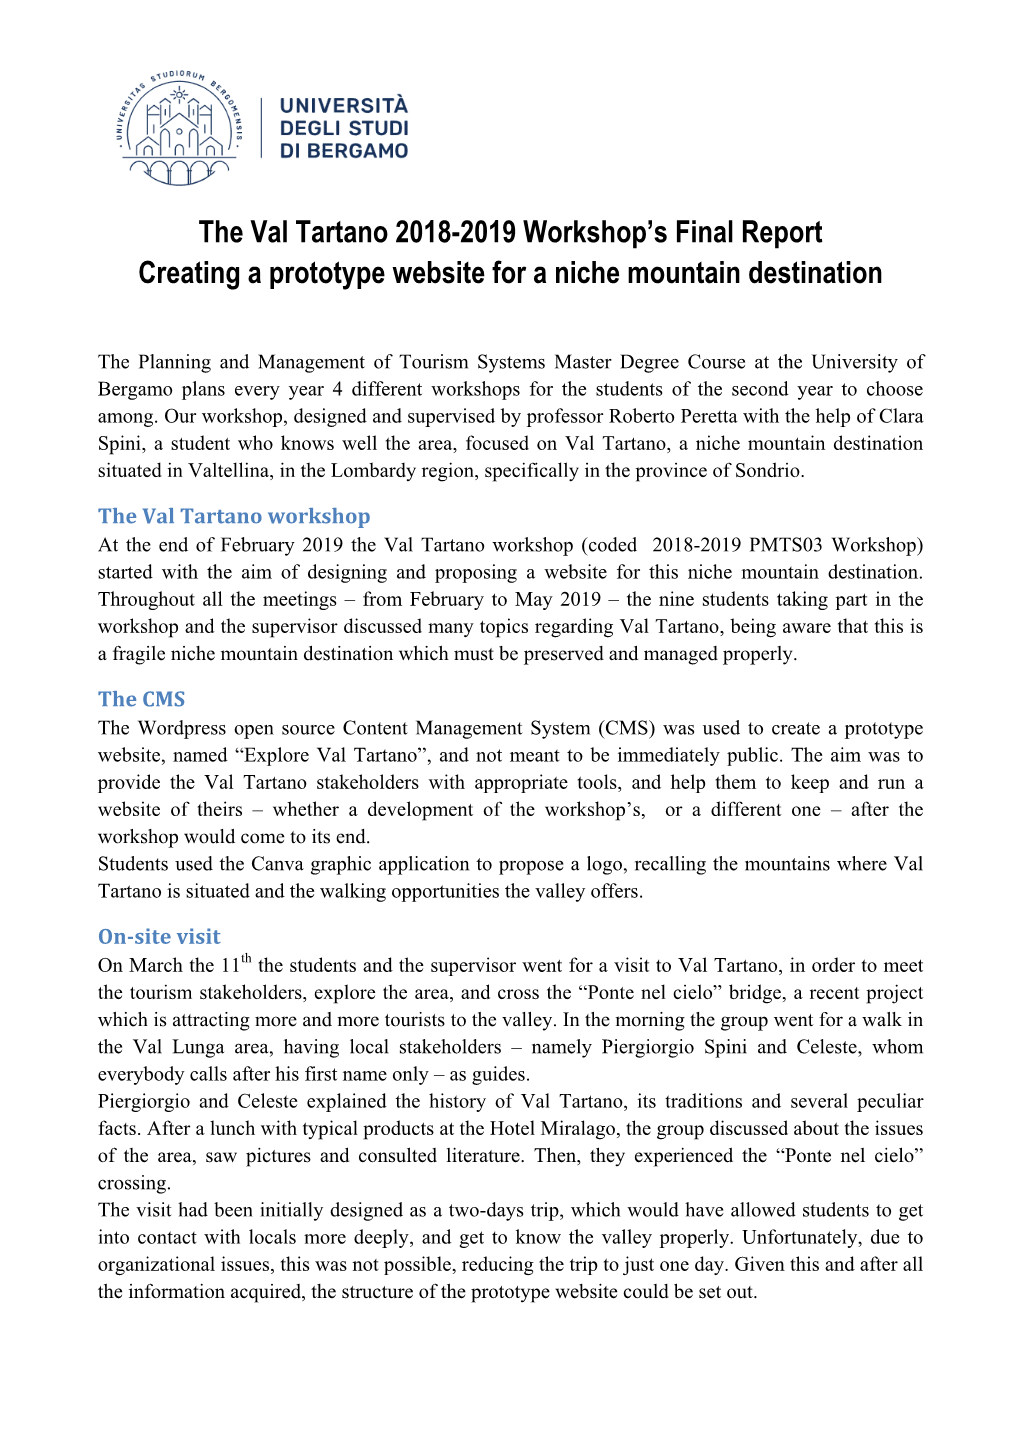 The Val Tartano 2018-2019 Workshop's Final Report Creating A